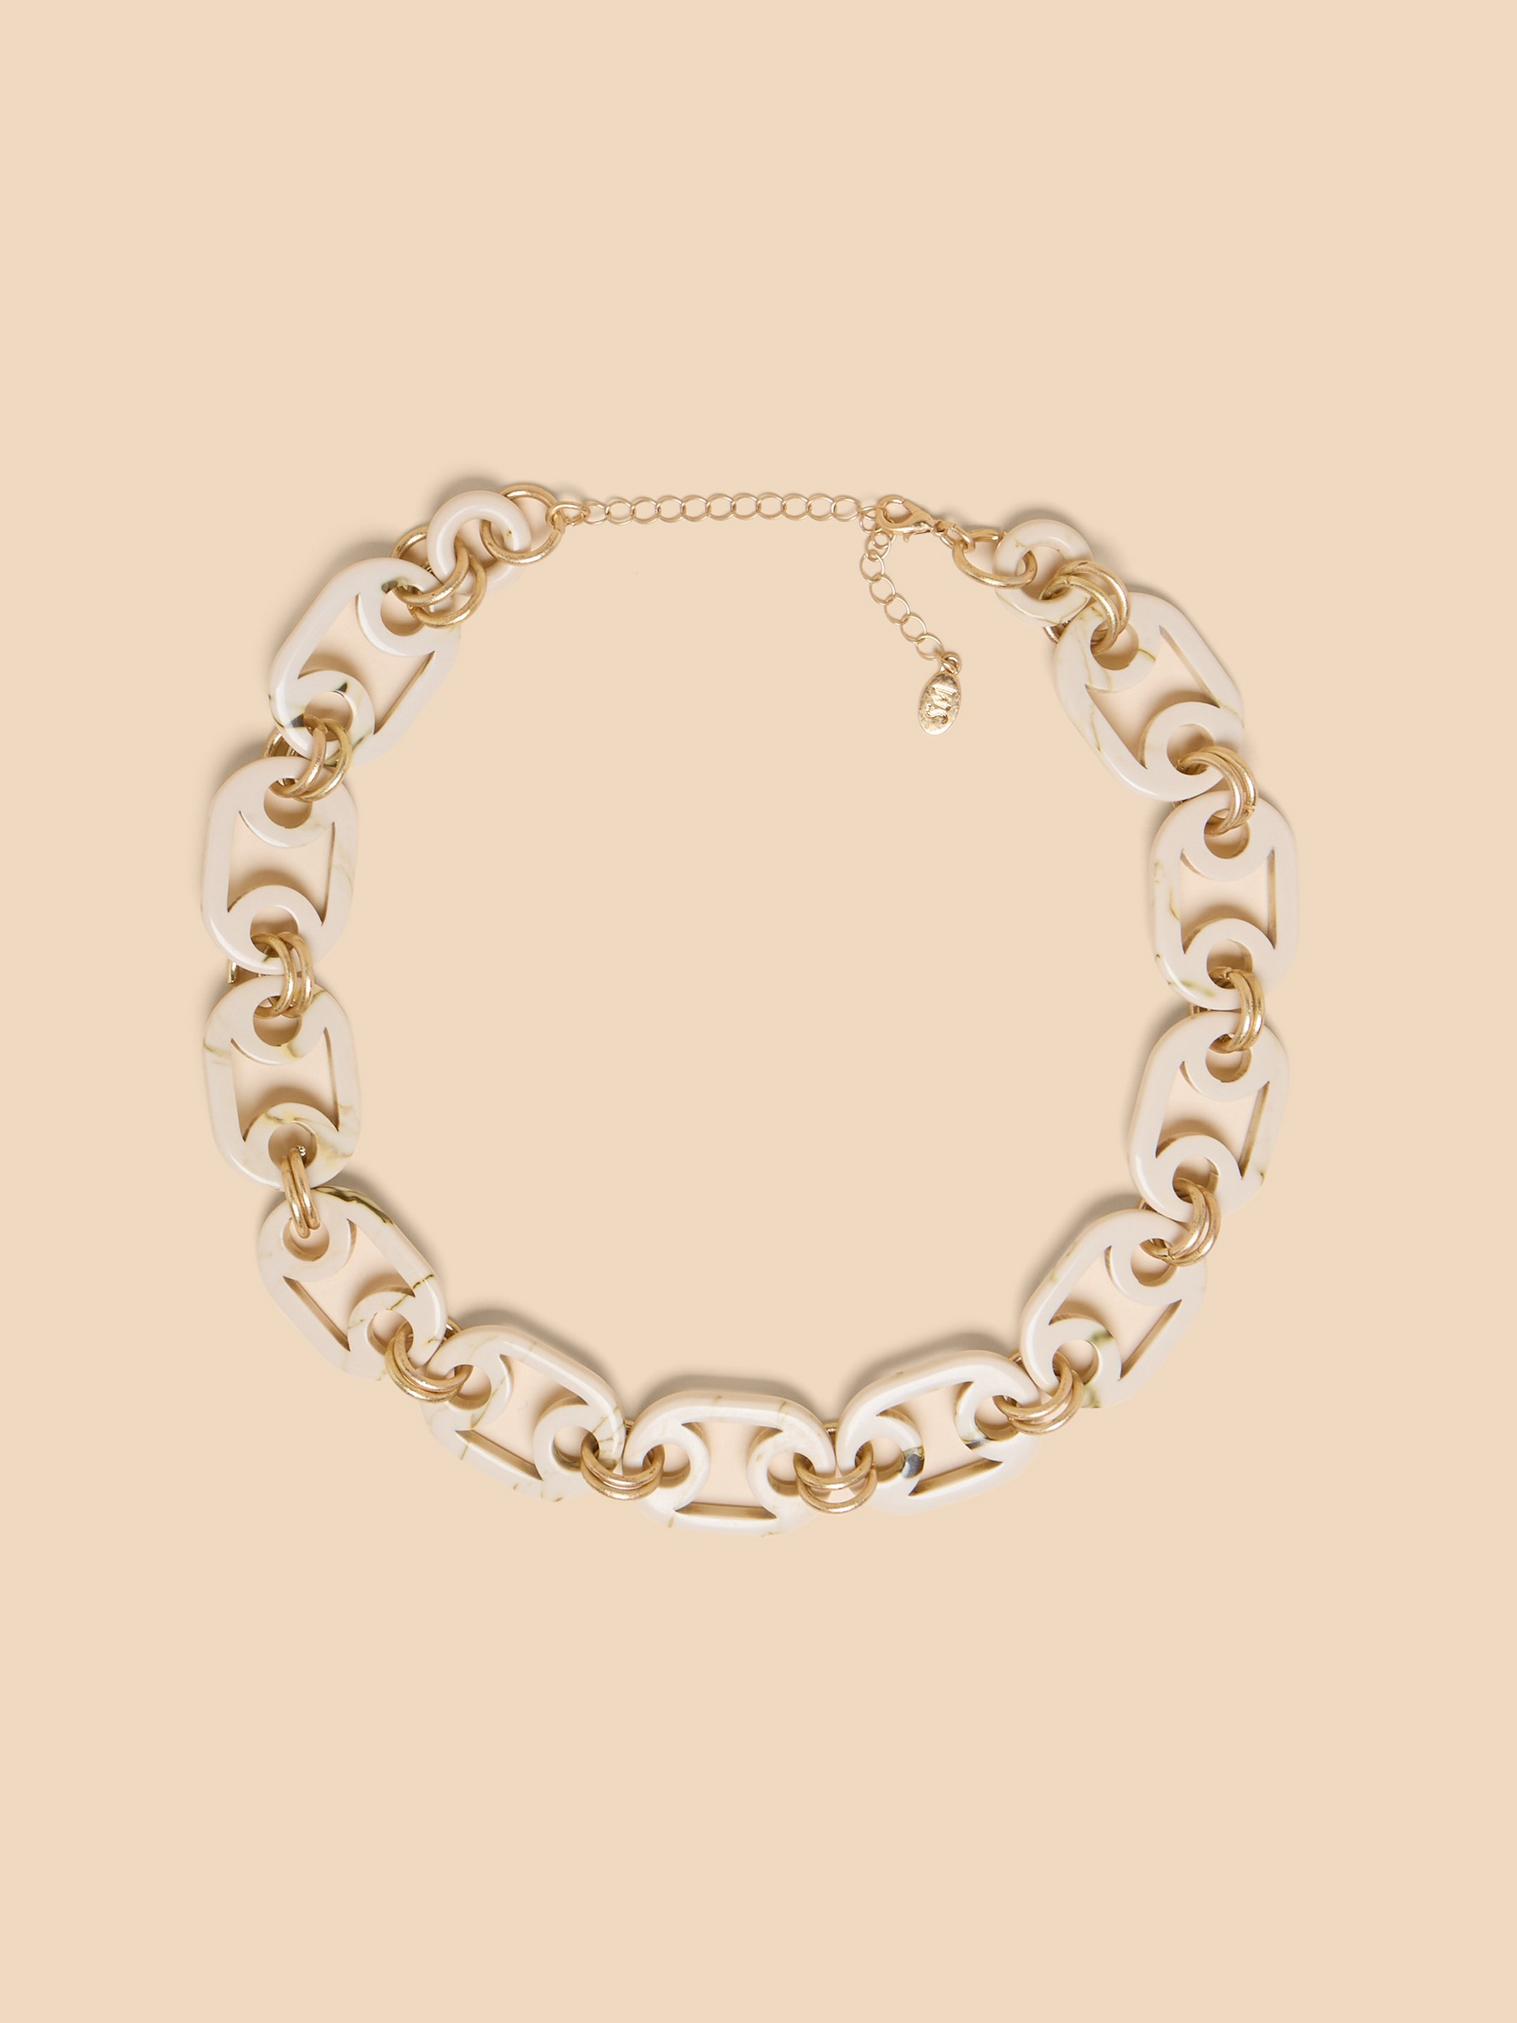 Ema Resin Chain Necklace in NAT MLT - FLAT FRONT